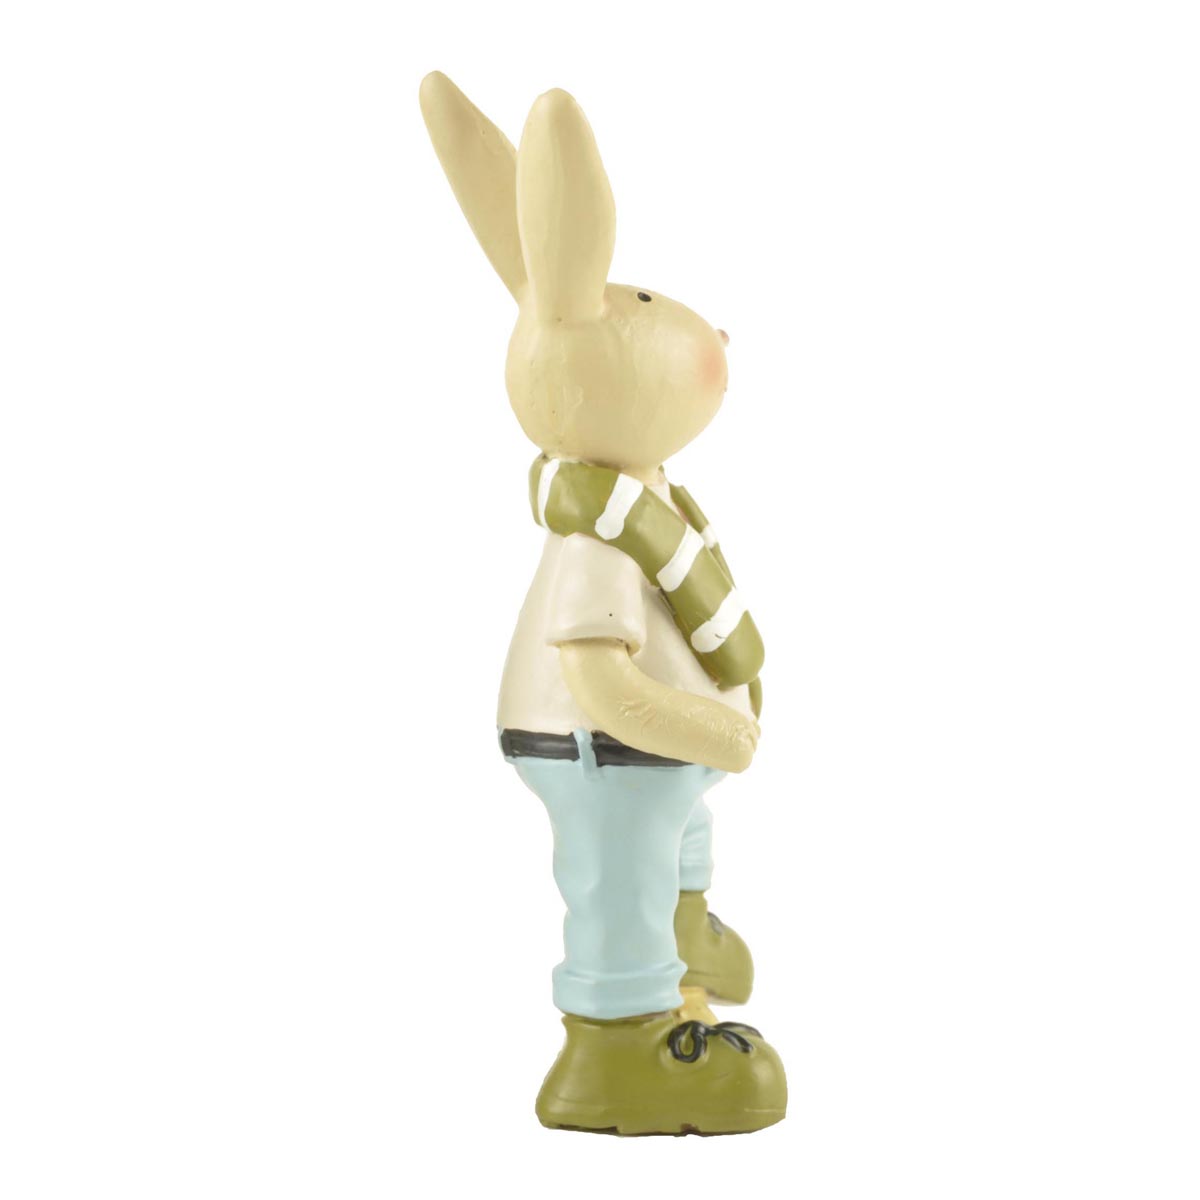 Ennas hot-sale easter bunny figurines polyresin for holiday gift-2